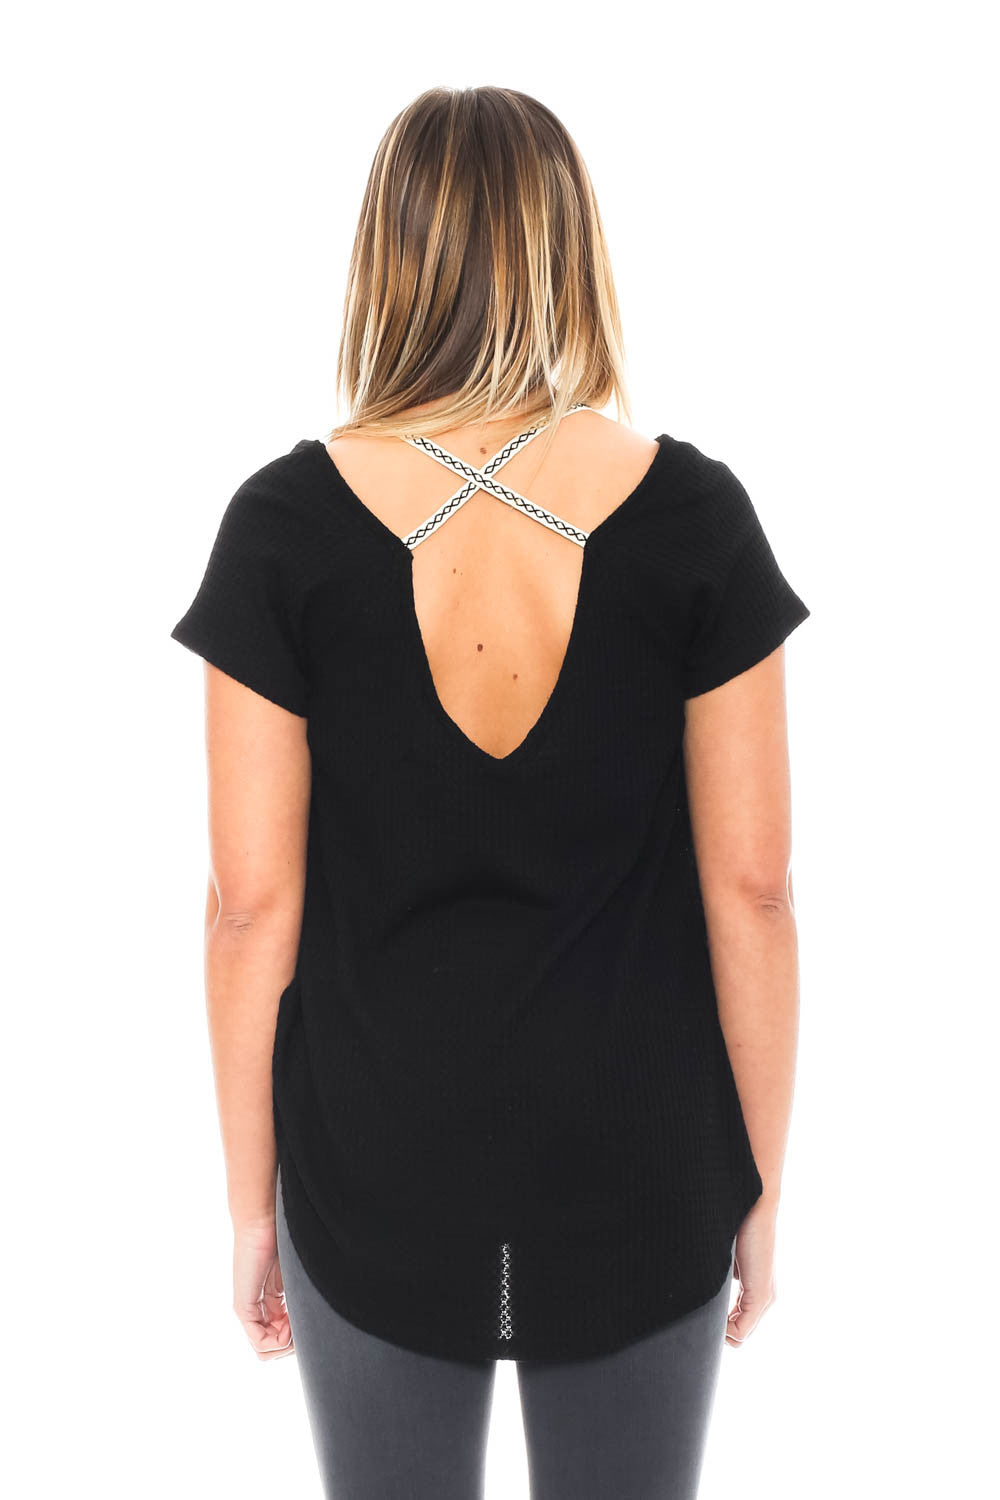 Shirt - High Low Top with Criss-Cross Back by Paper Crane